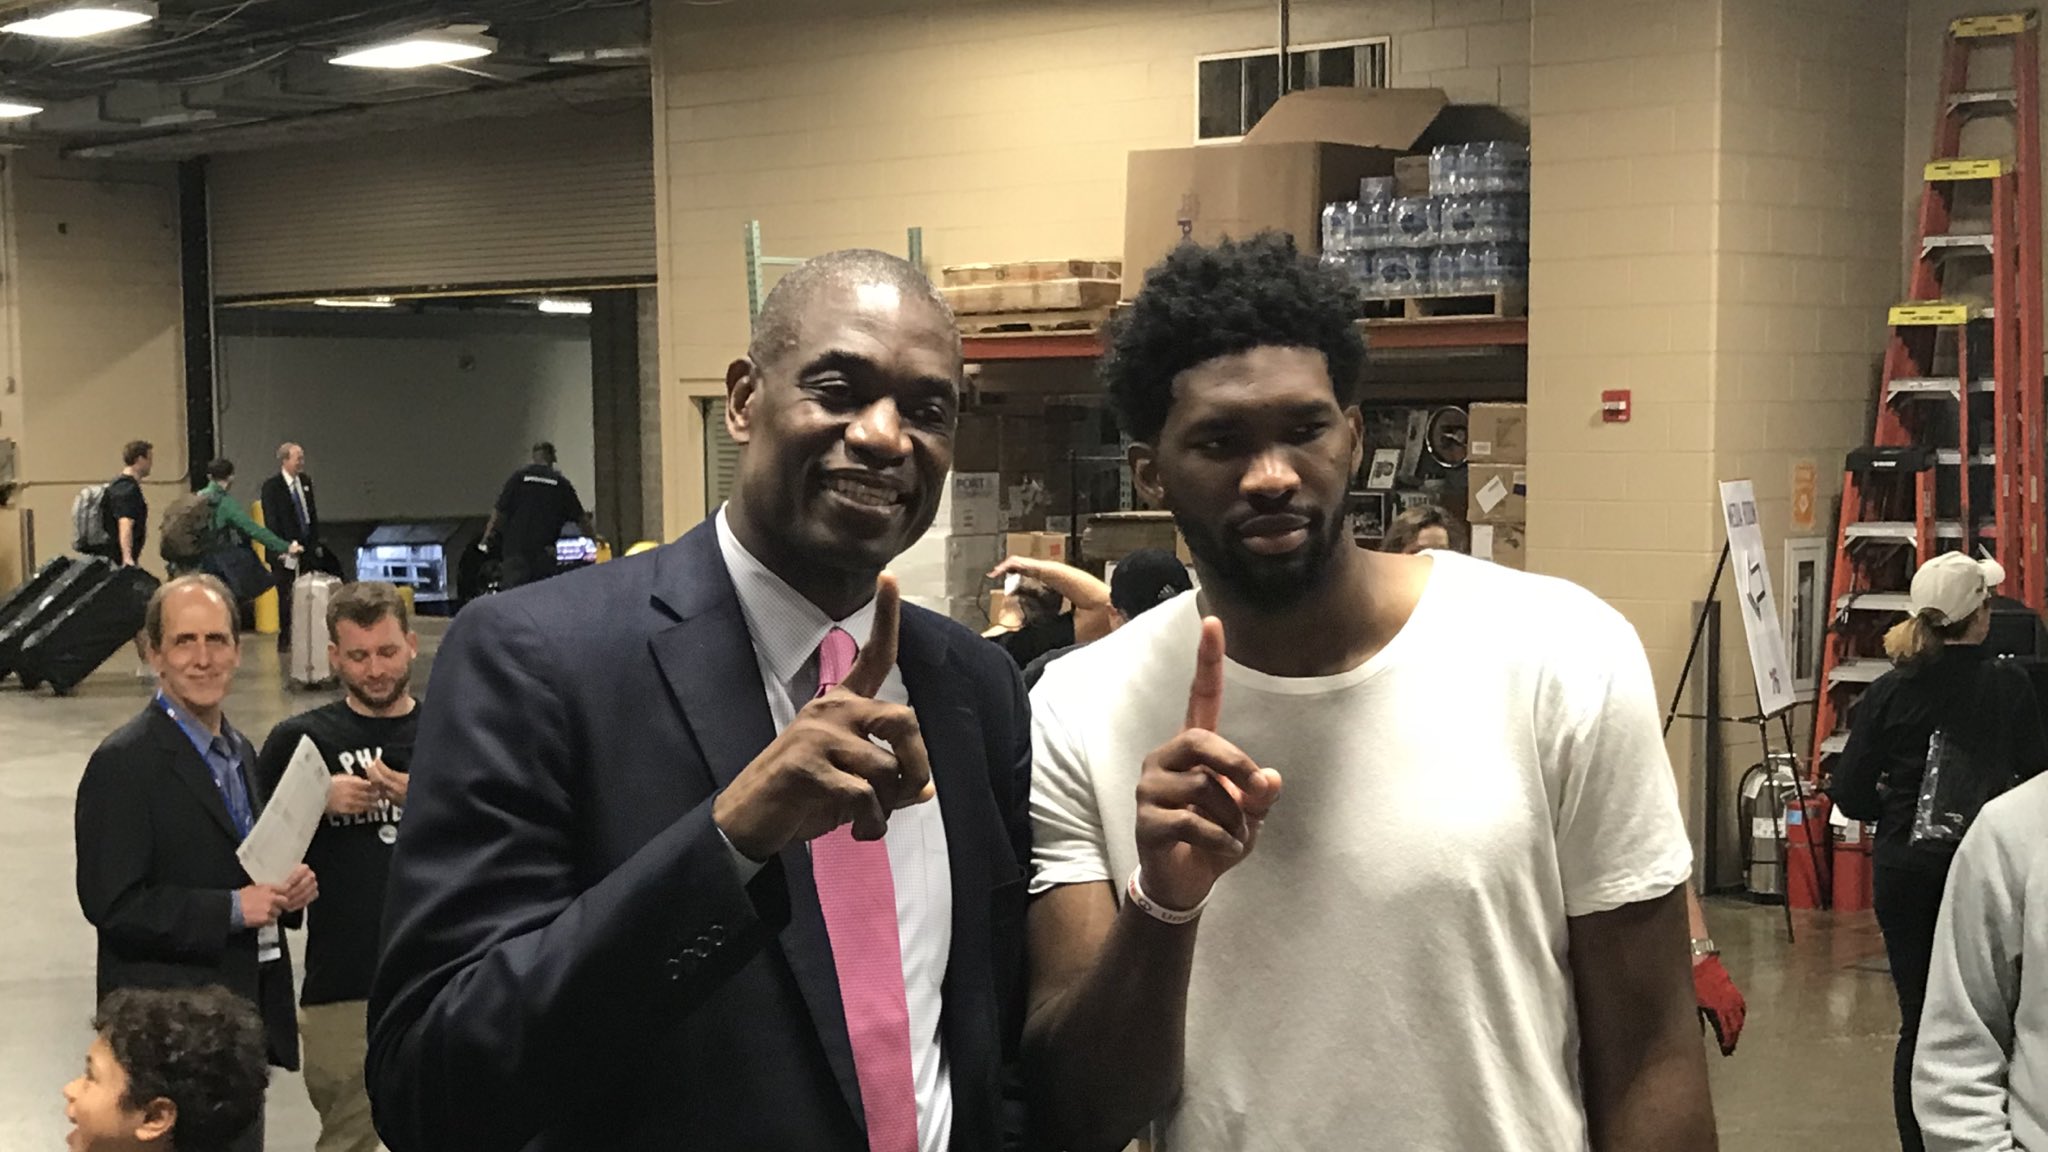 Sixers: The Joel Embiid and Dikembe Mutombo connection